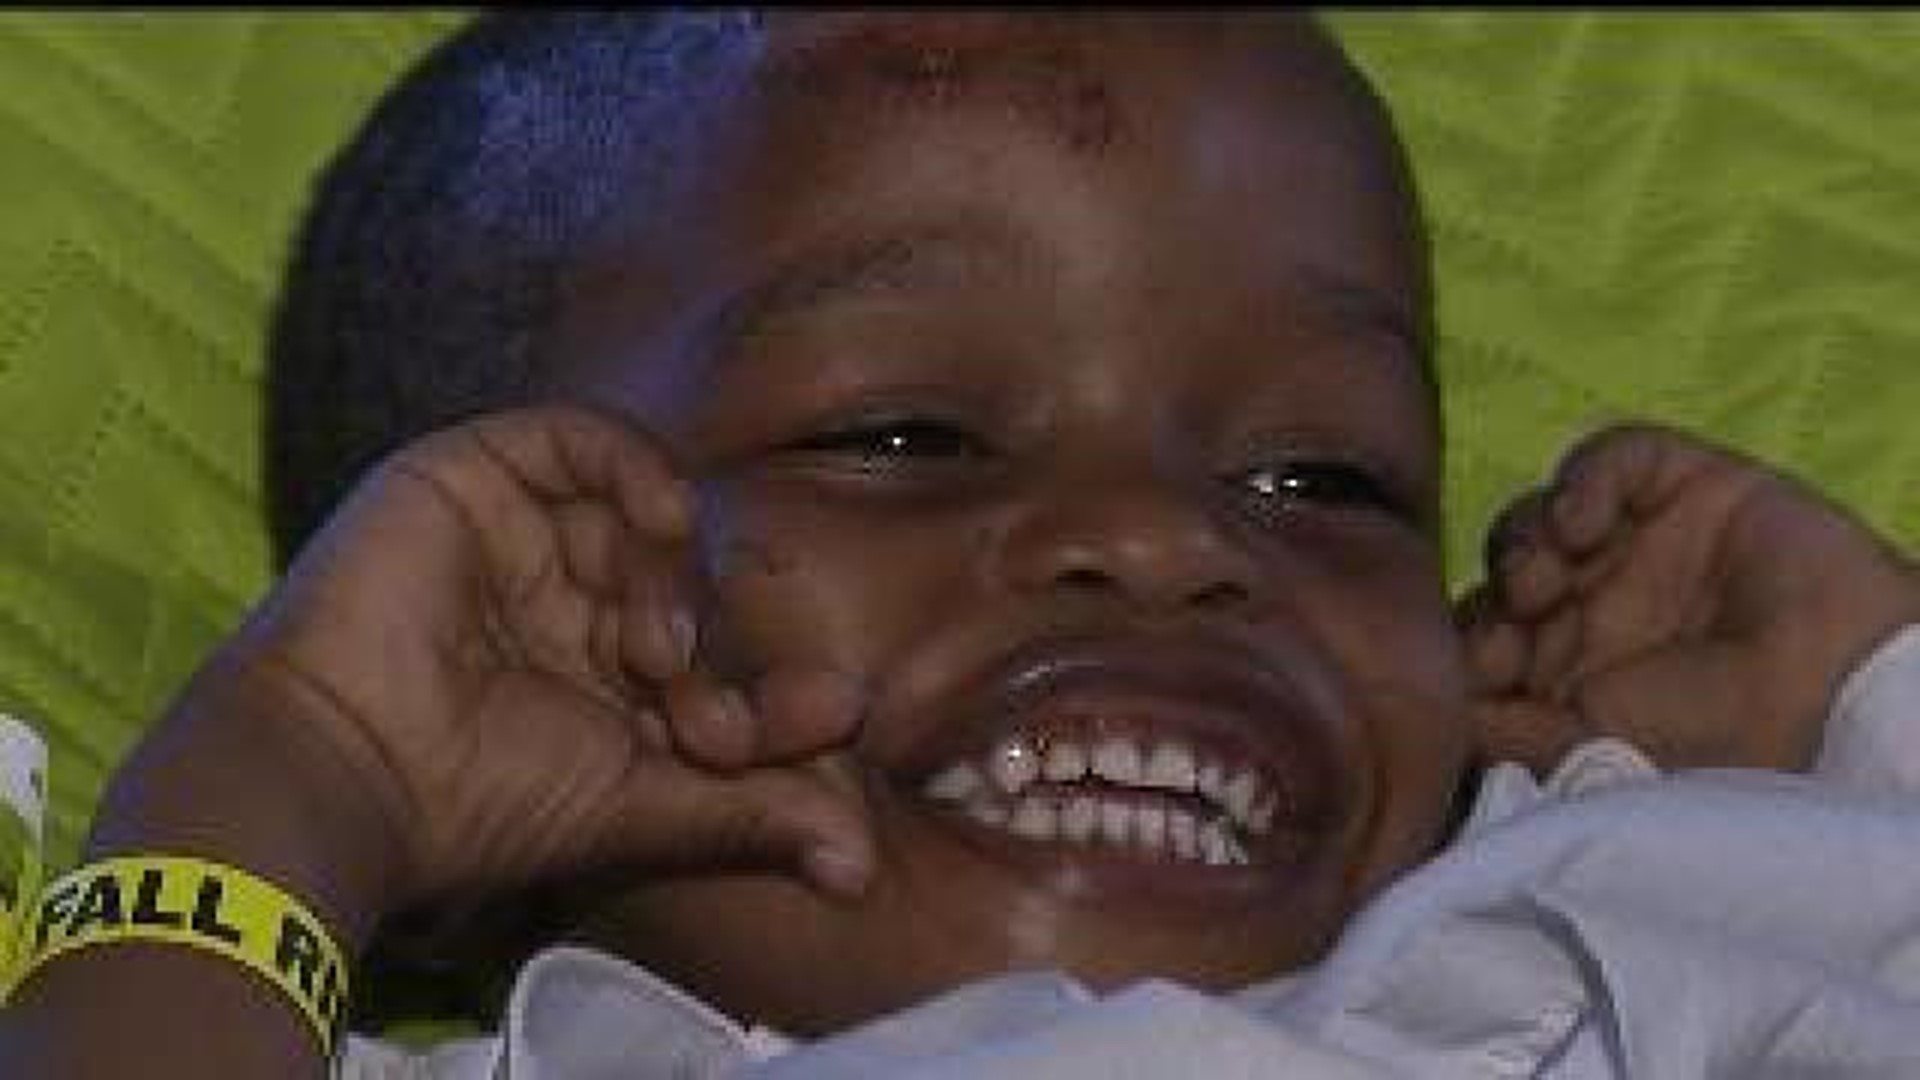 Toddler recovering from hit and run